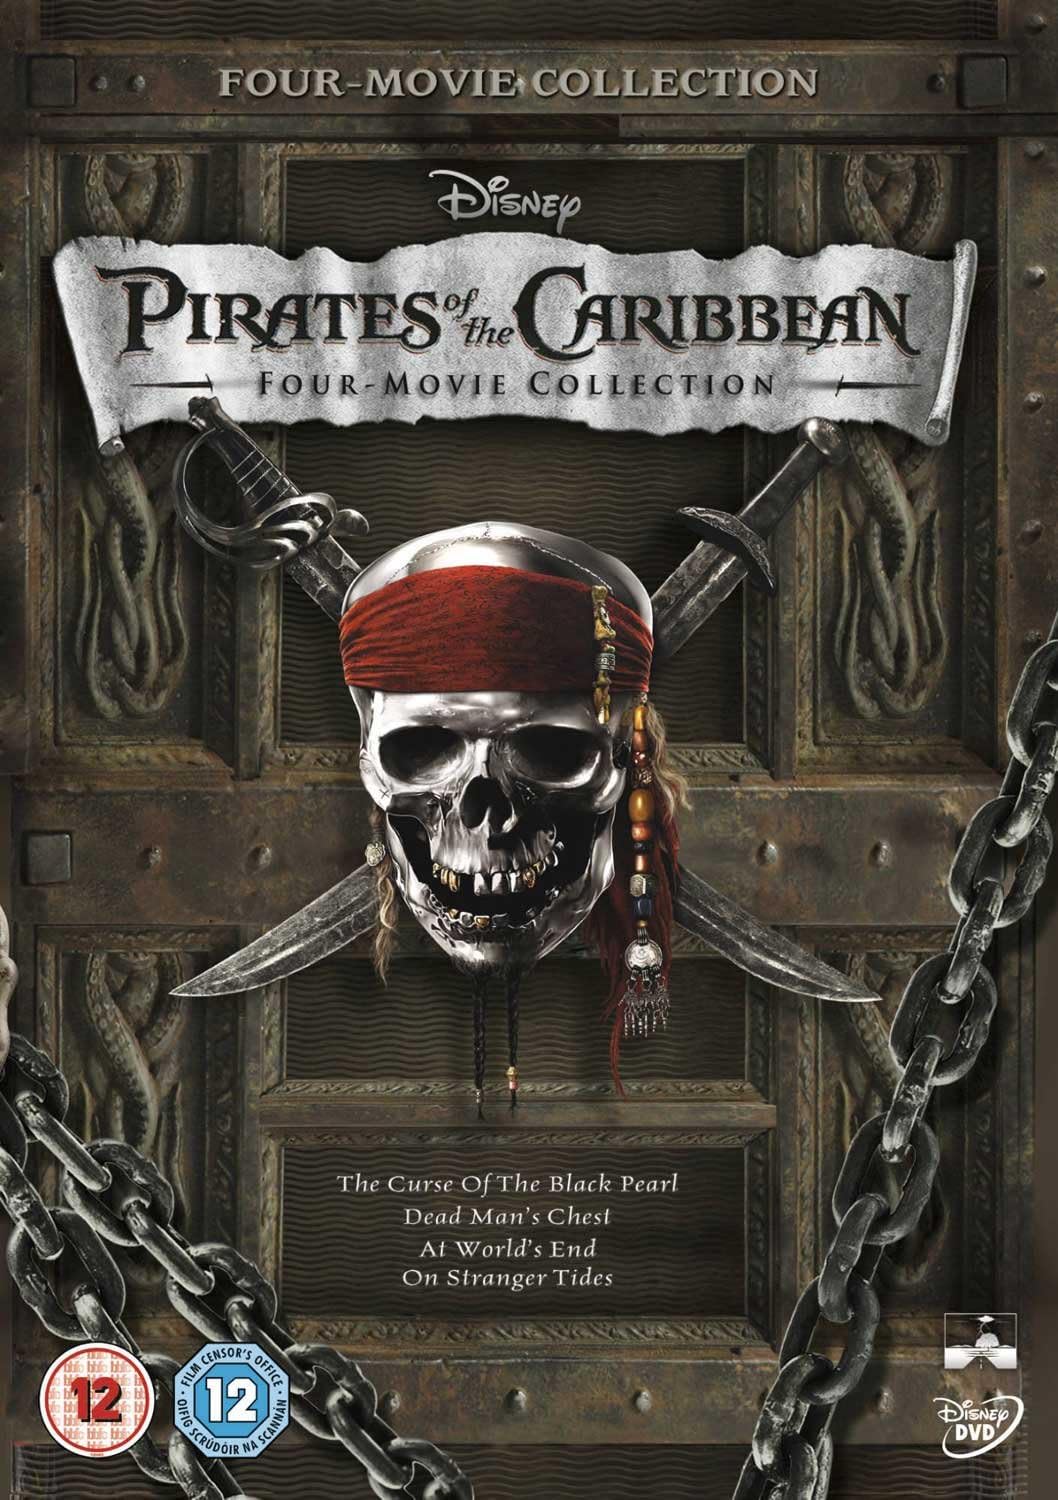 Pirates of the Caribbean 1-4 Box Set DVD Rated 12 (2011) RRP 14.99 CLEARANCE XL 7.99